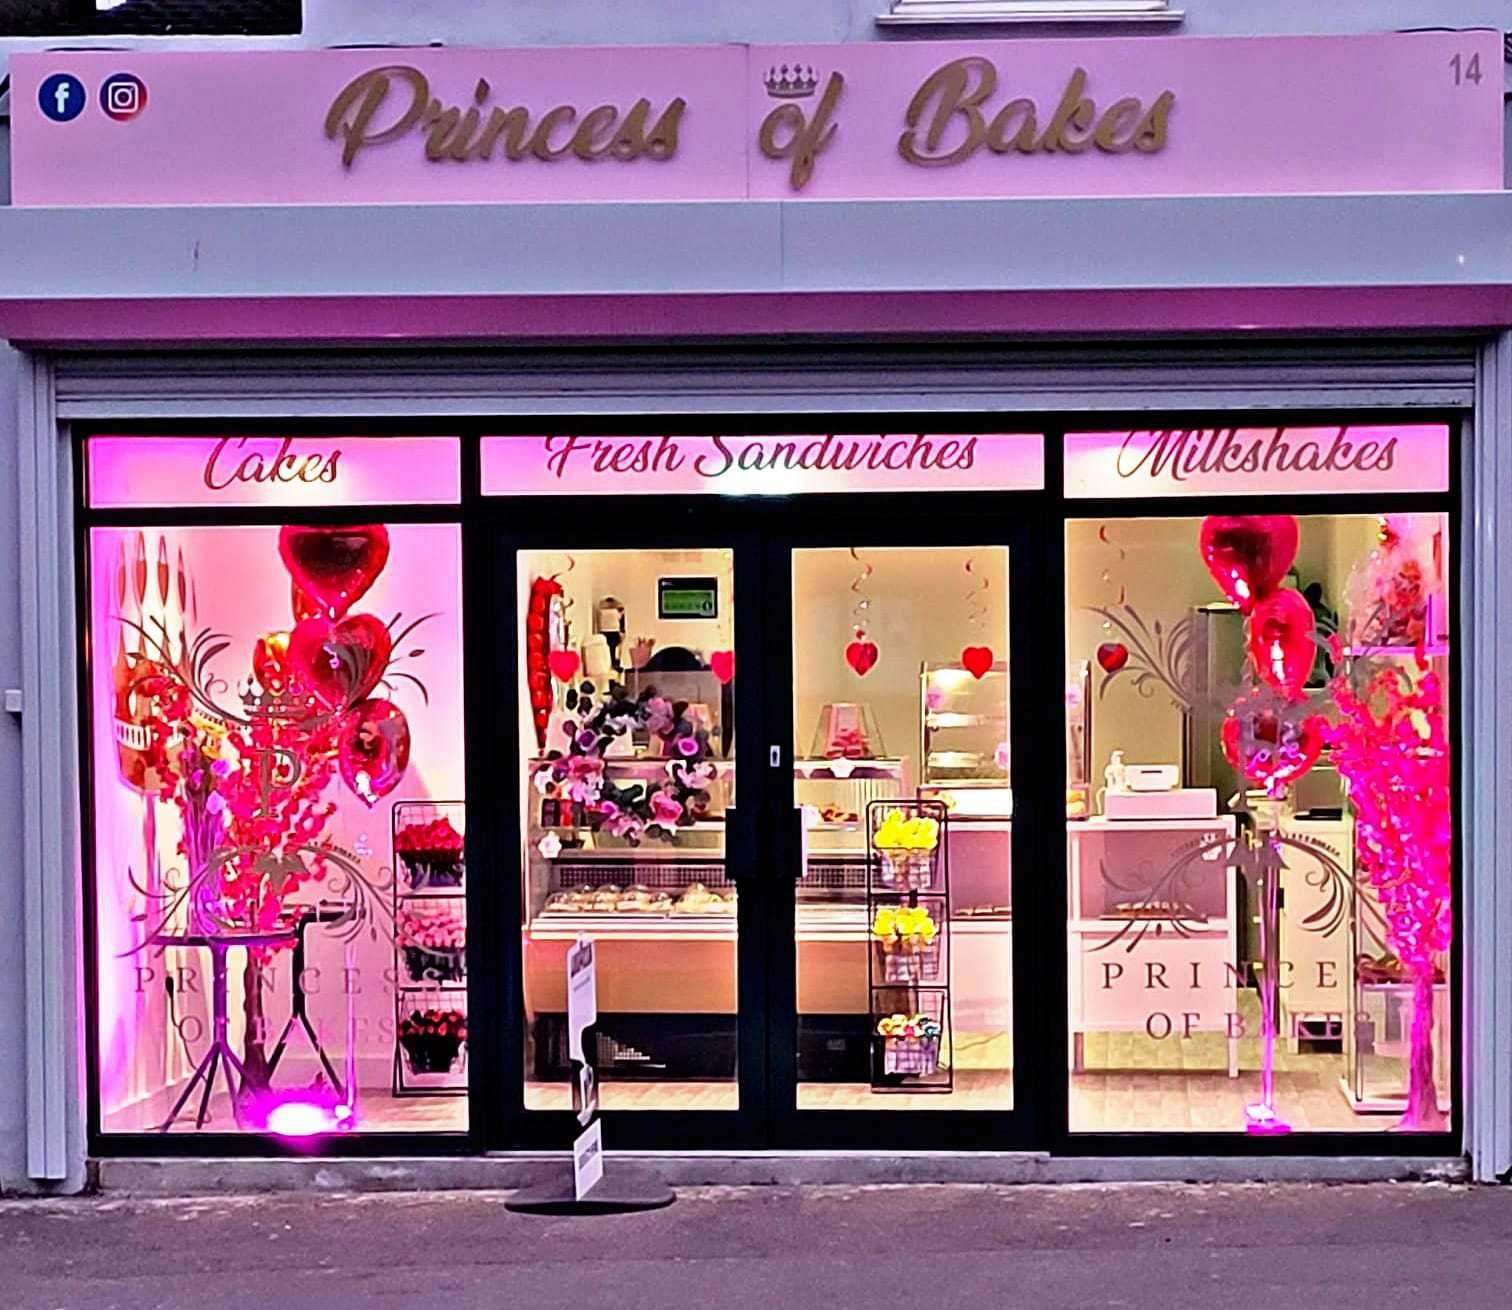 Princess of Bakes in Canterbury Street, Gillingham. Picture: Princess of Bakes